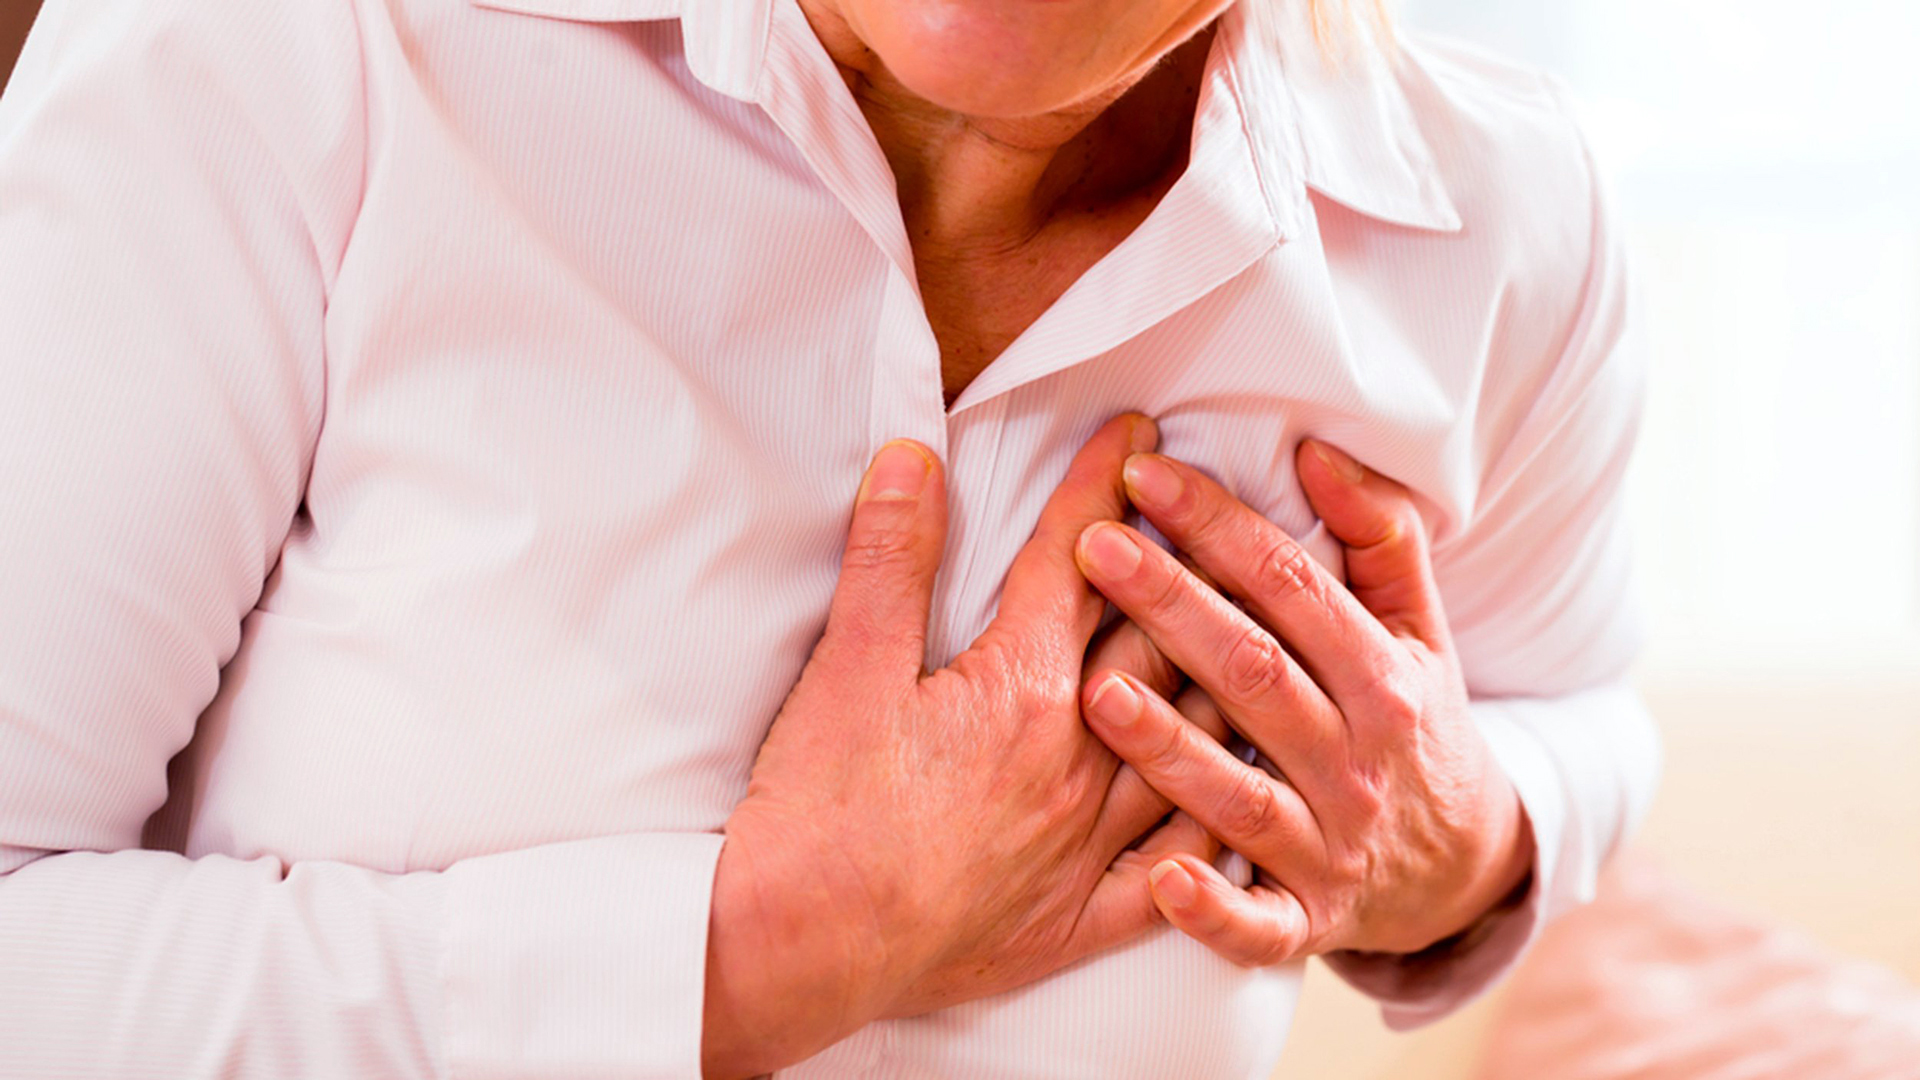 5 Heart attack symptoms in women that are super common (and scary)